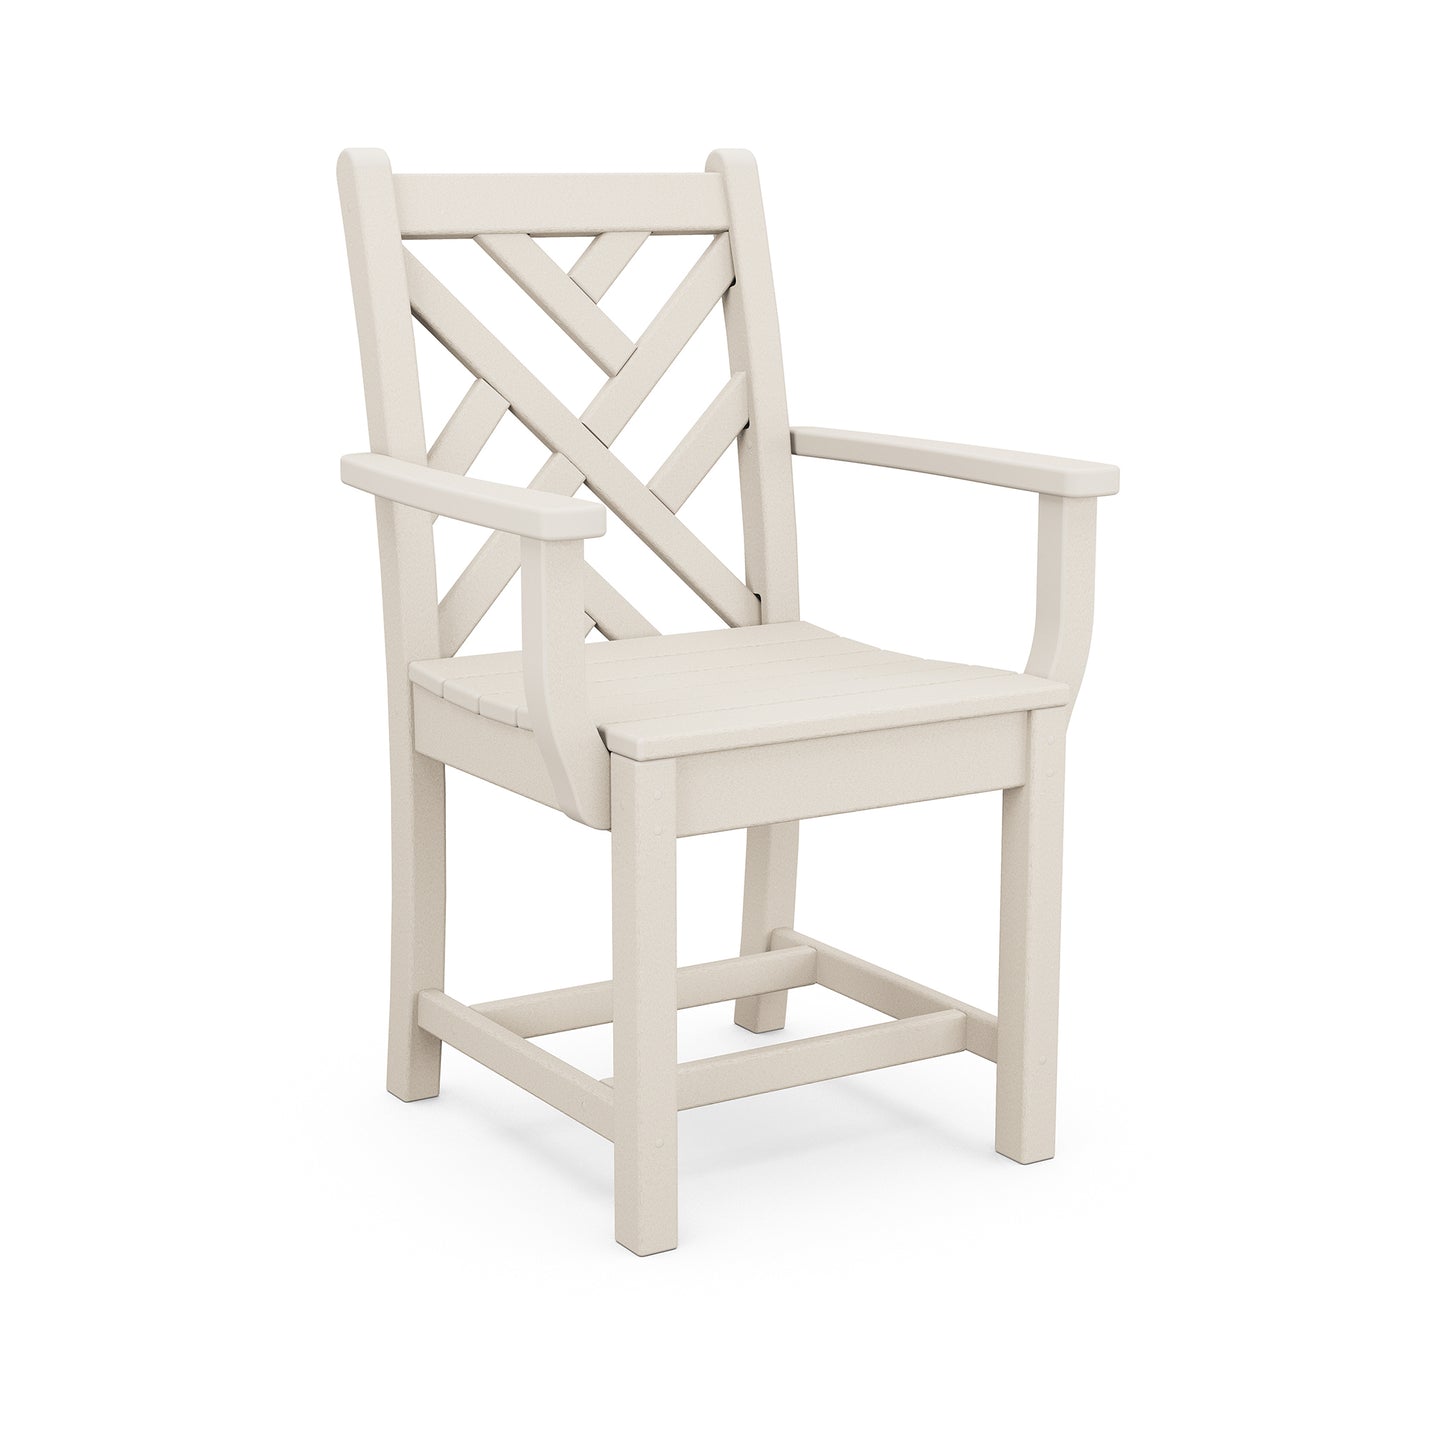 A neutral-toned POLYWOOD Chippendale Outdoor Dining Arm Chair with an x-back design and a slatted seat, standing on a simple white background.